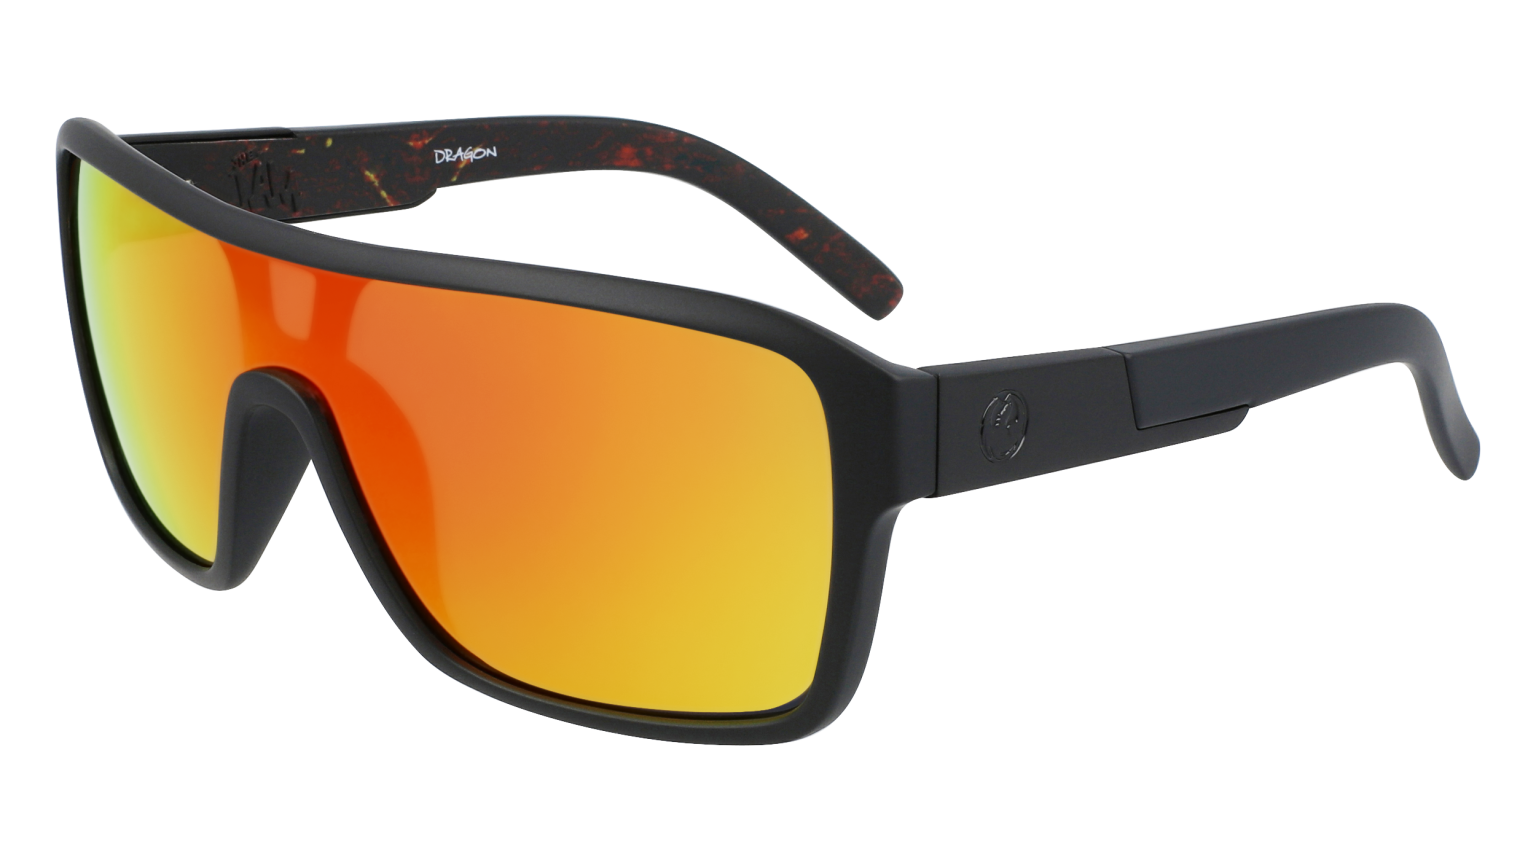 REMIX - Matte Black/Inferno with Lumalens Red Ionized Lens